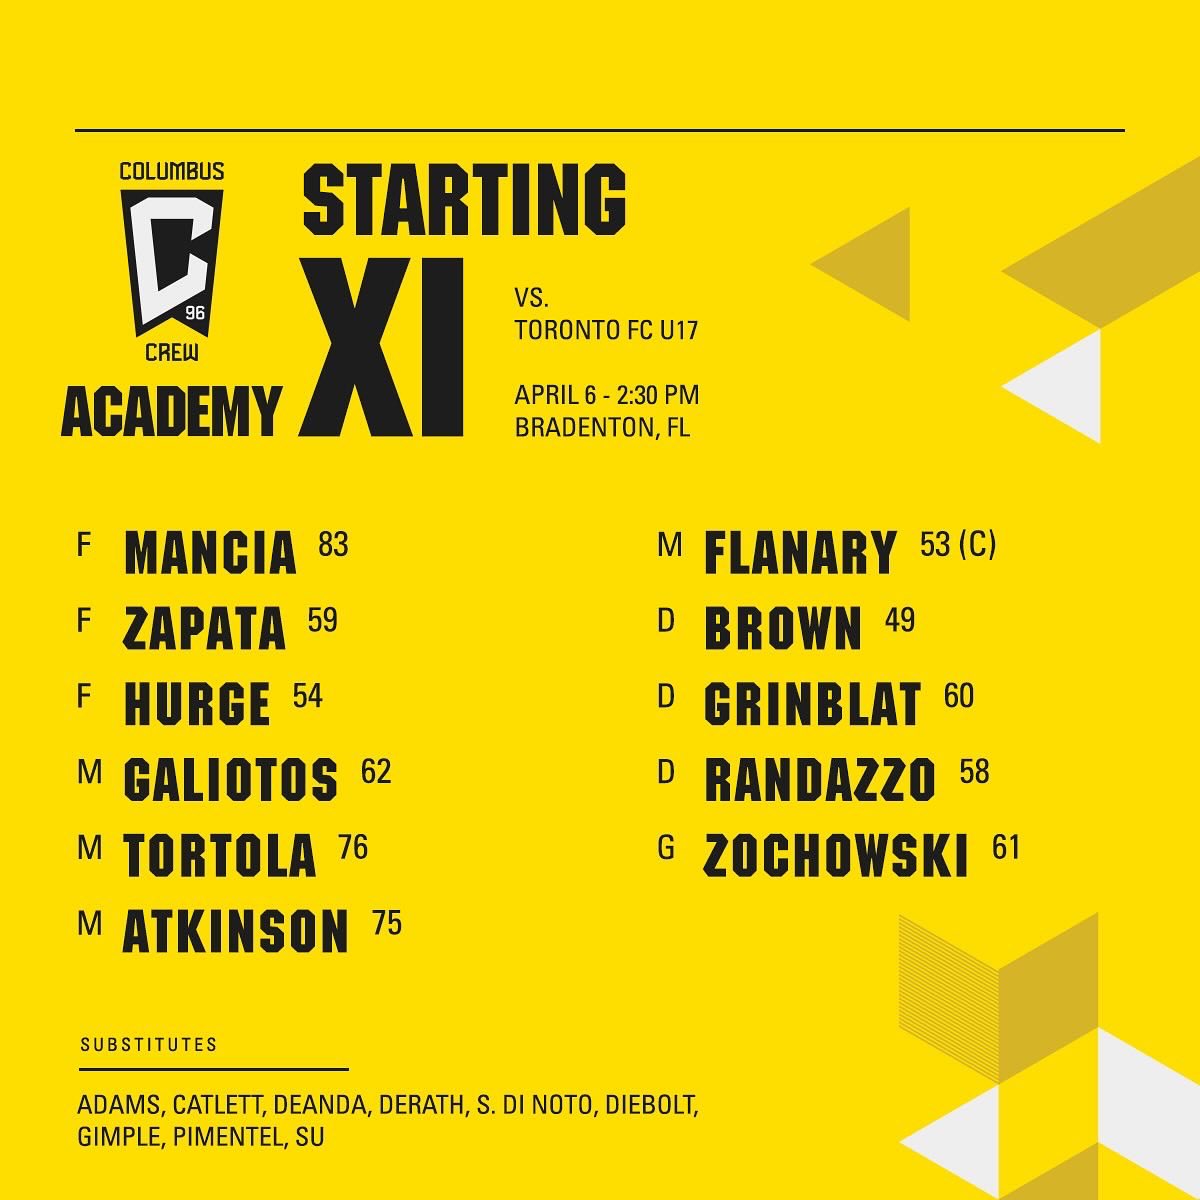 Our squad earlier this afternoon 🆚 Toronto FC 🤩 #Crew96 | #VamosColumbus